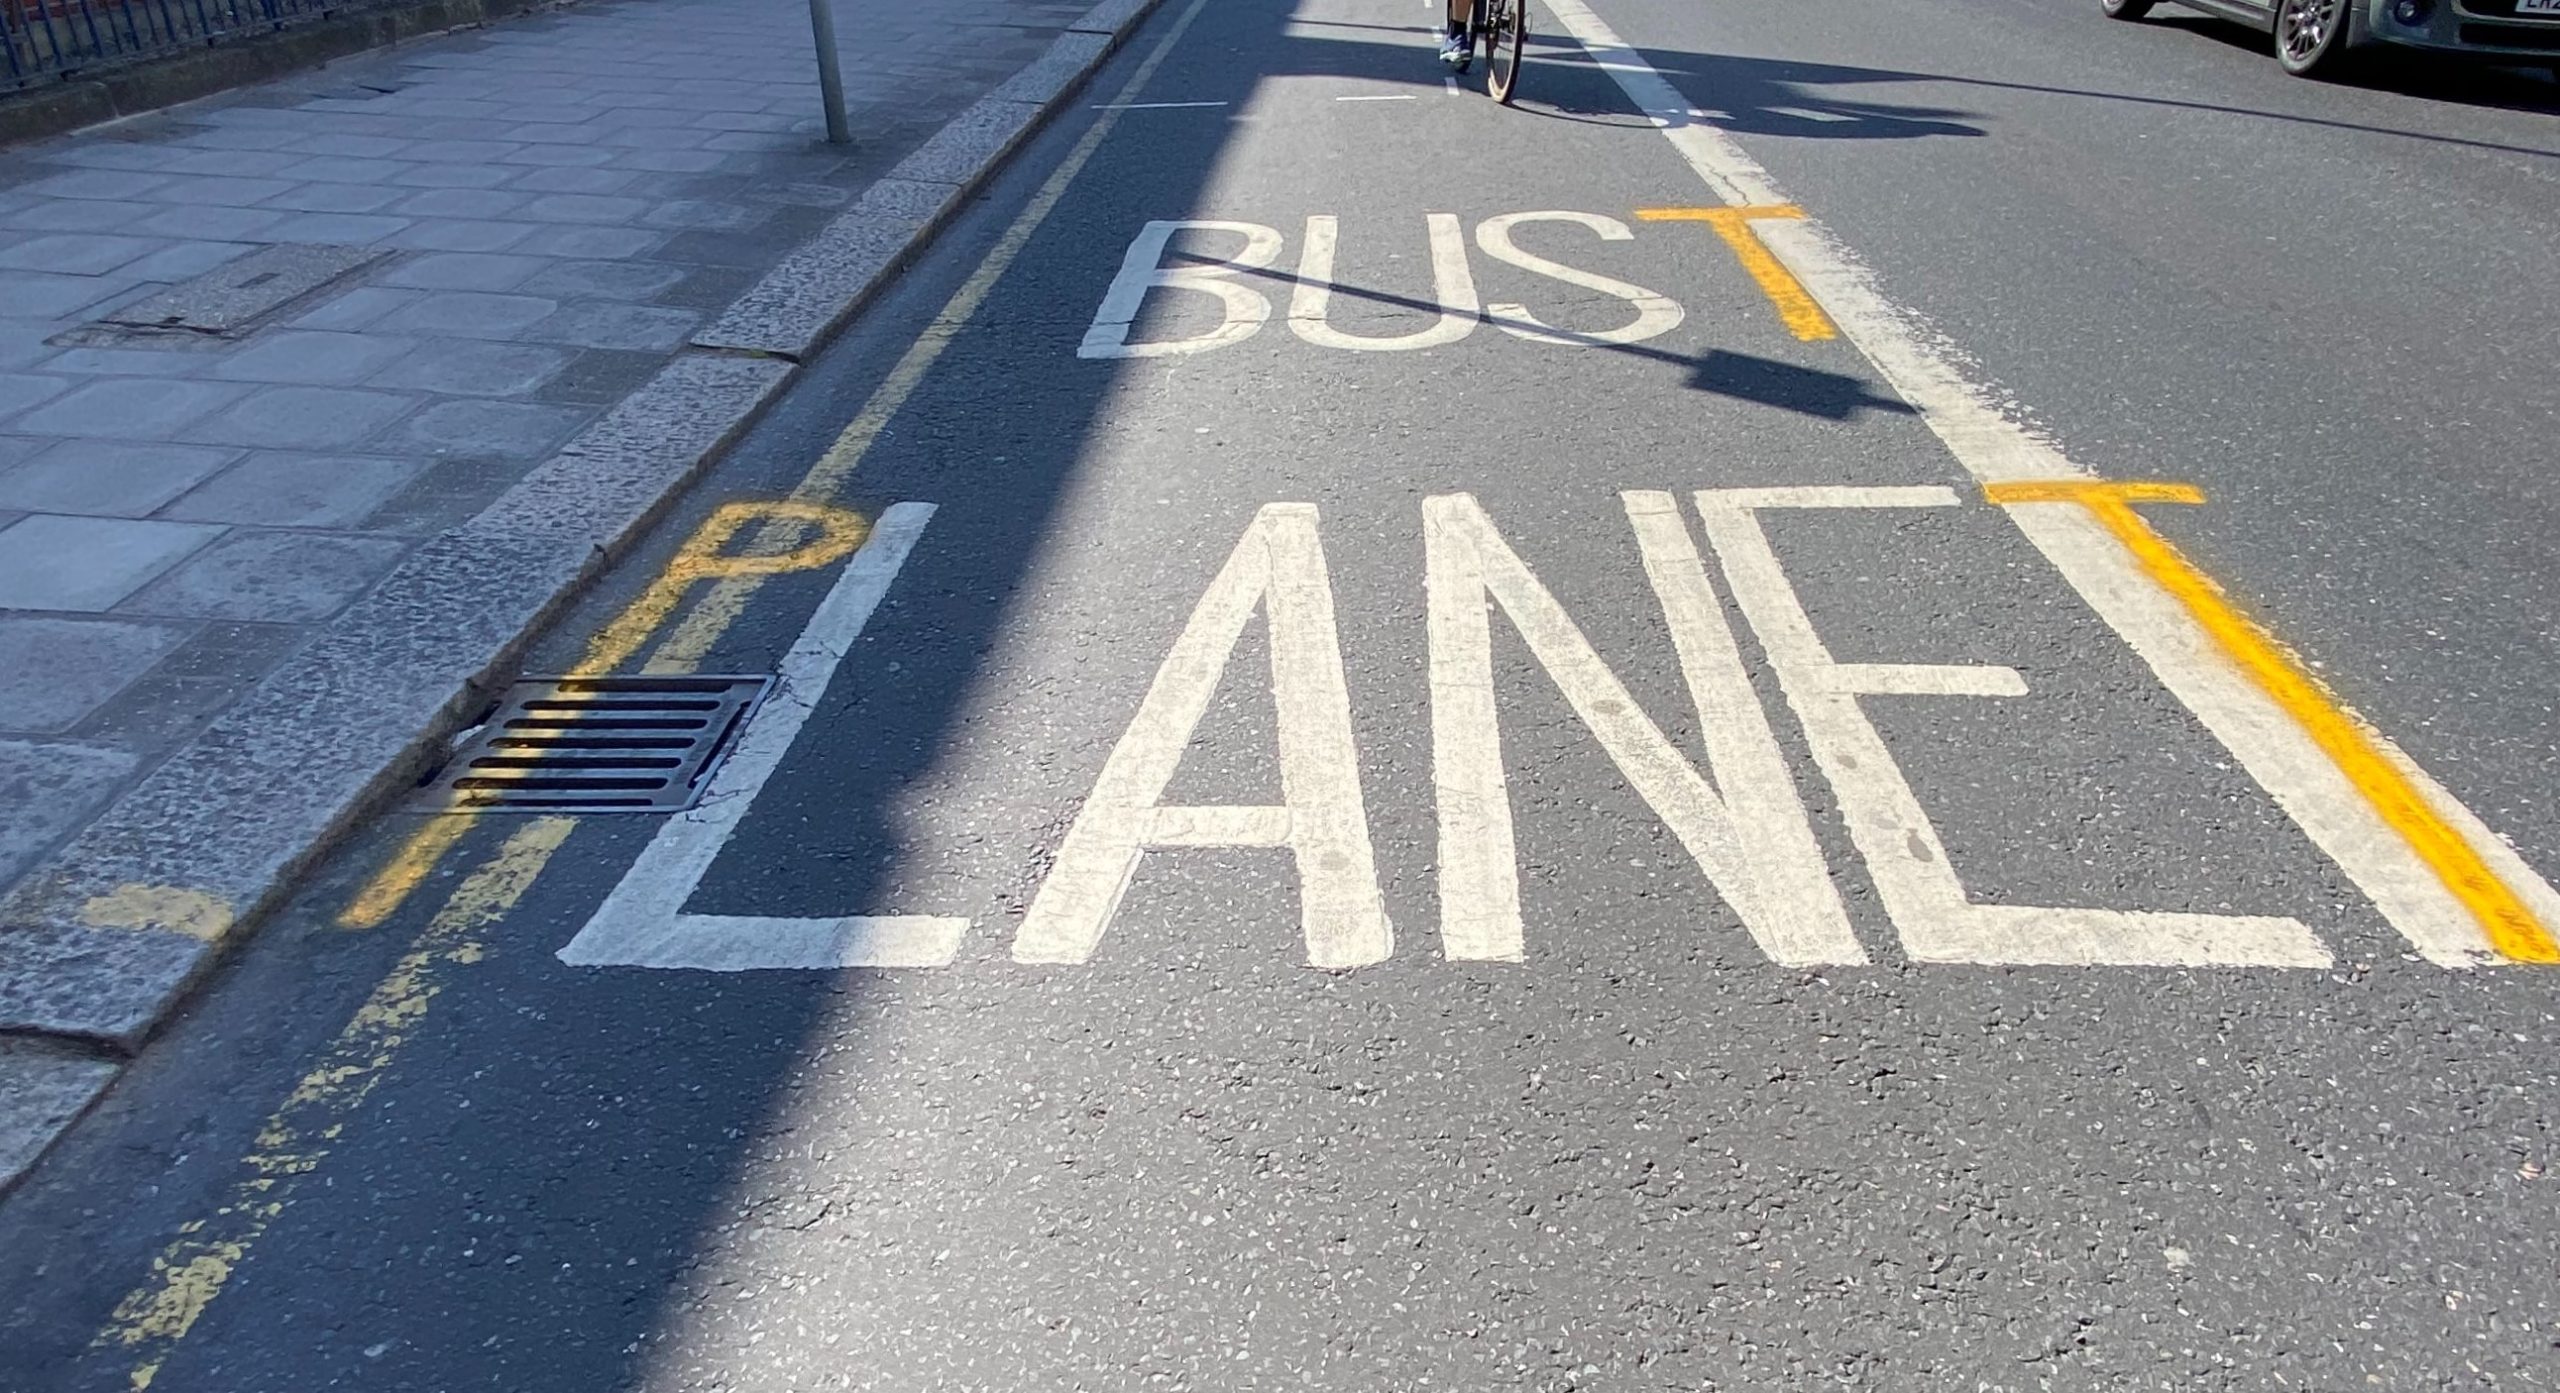 NEWS | Herefordshire Council wants to use Government money for bus lanes, cycle lanes, 20mph speed limits and a new transport hub in Hereford